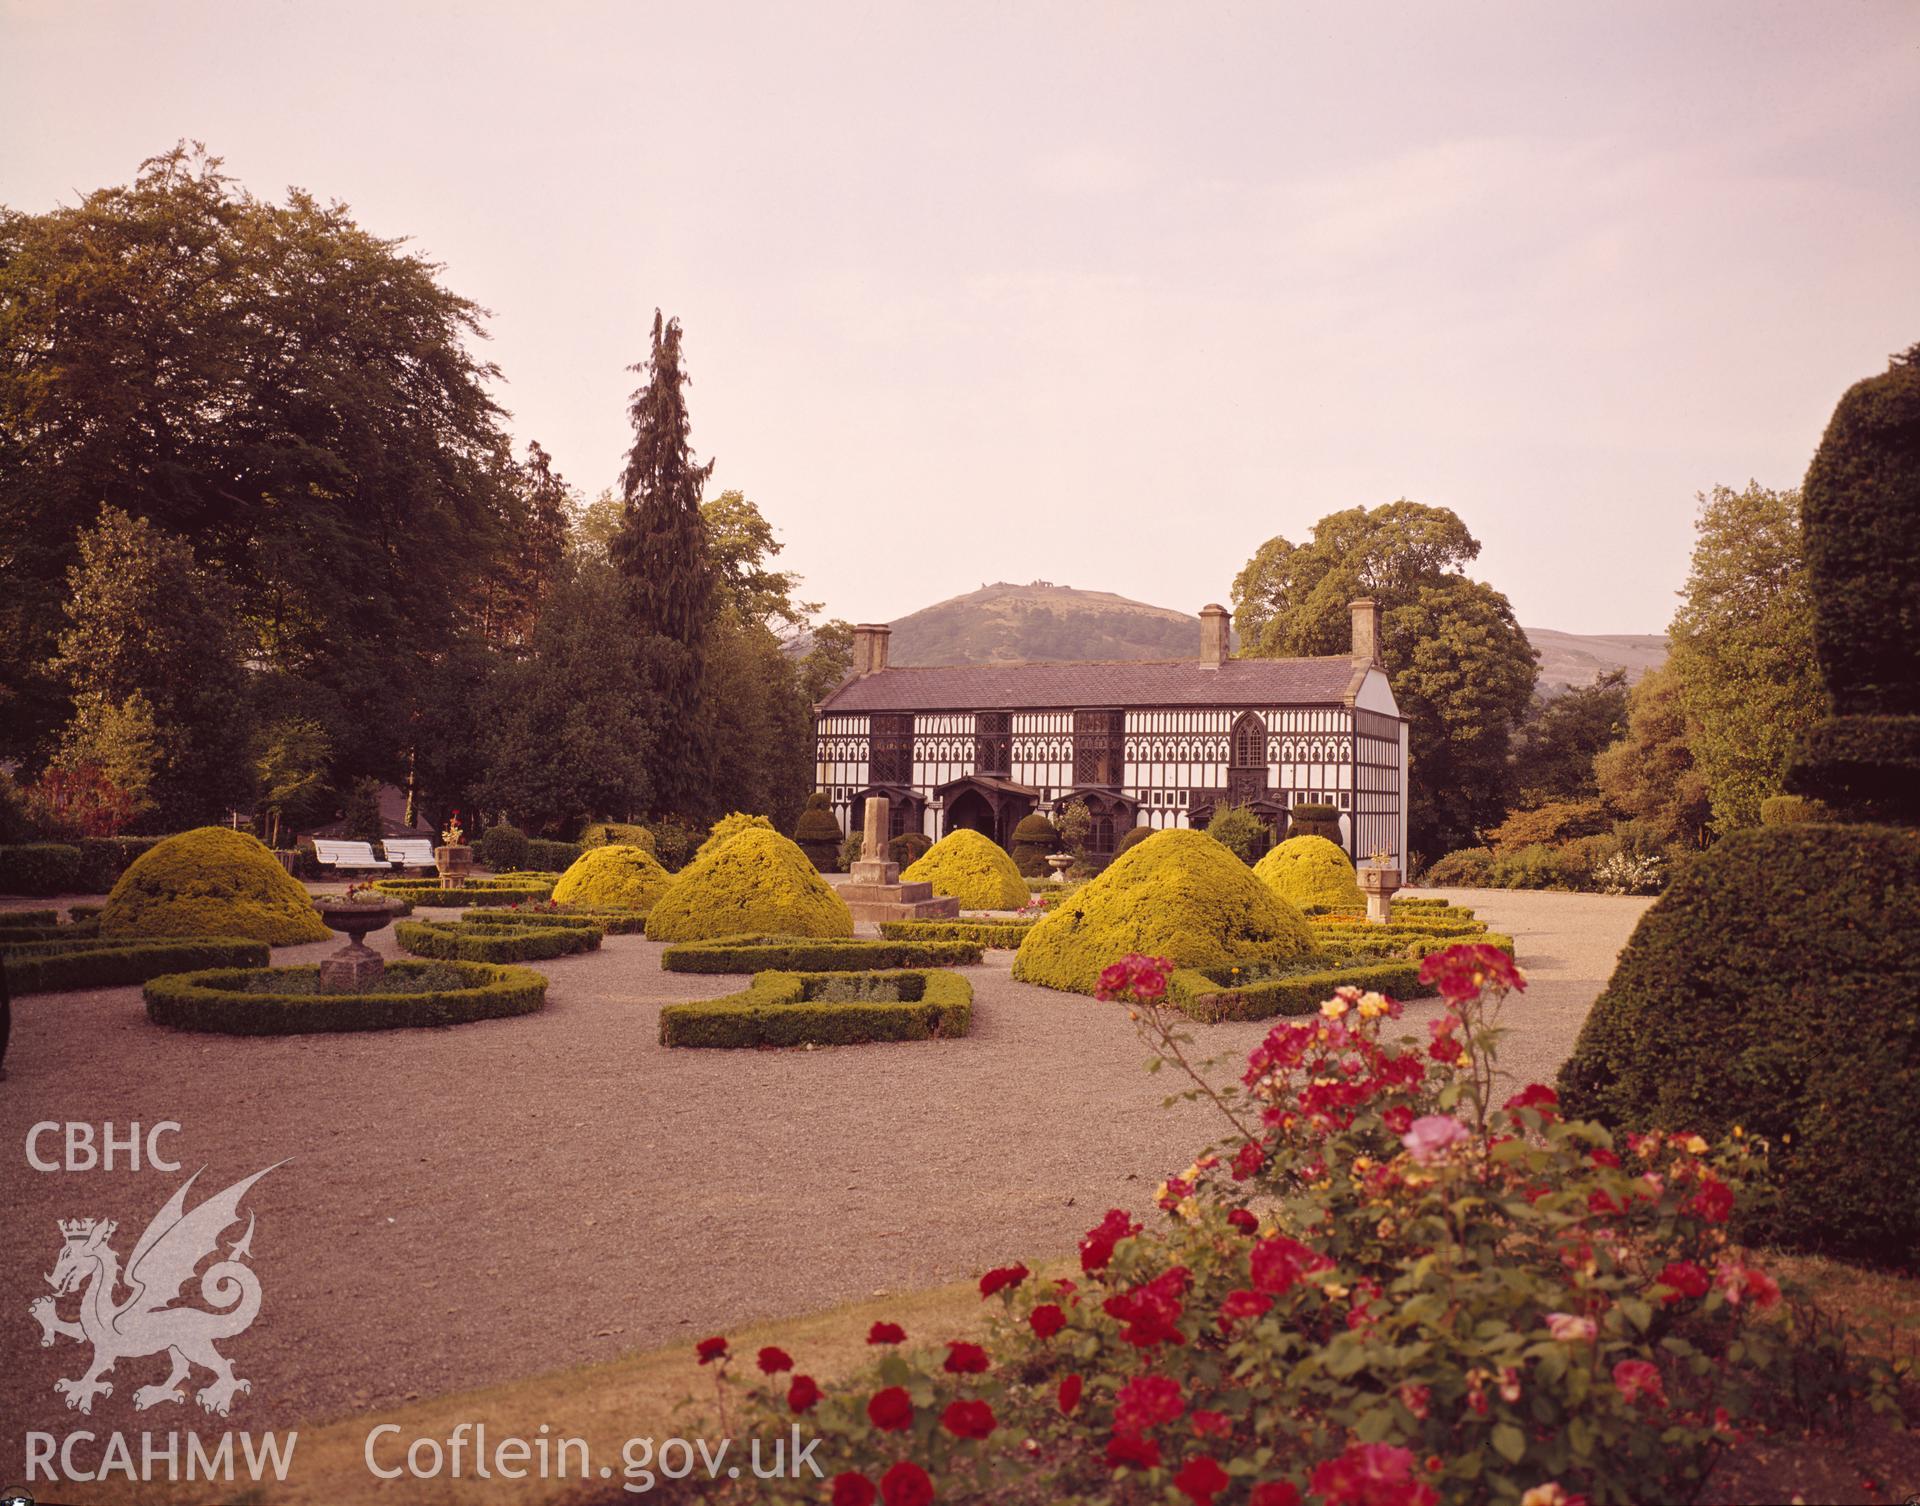 1 colour transparency showing view of Plas Newydd, Llangollen; collated by the former Central Office of Information.